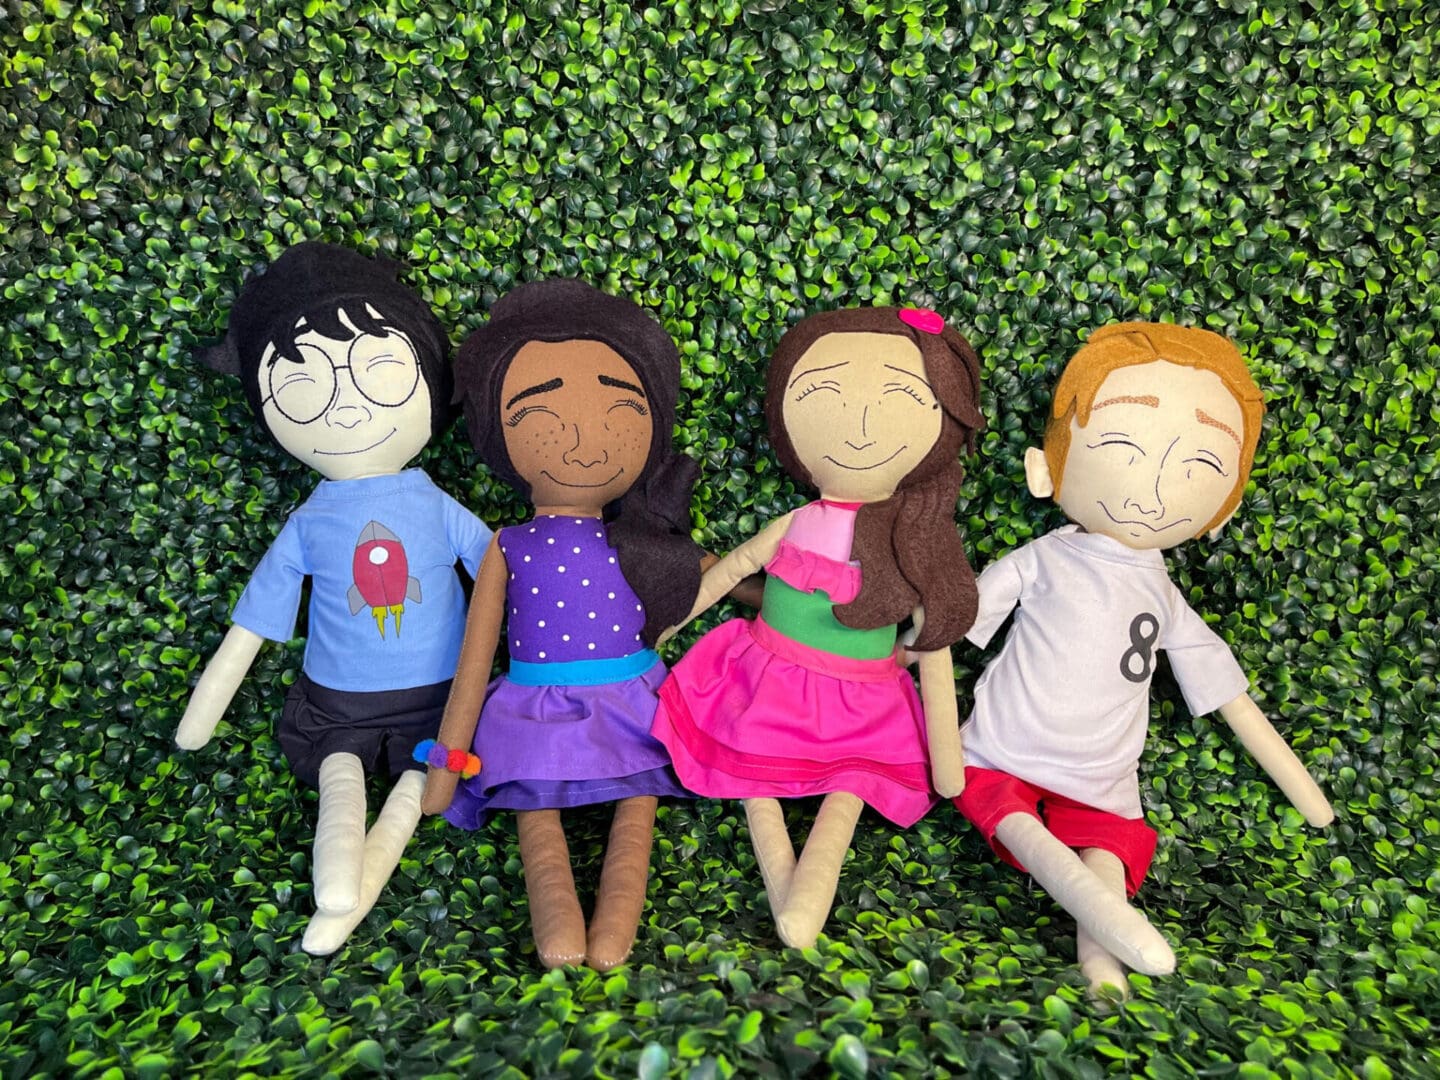 A group of four dolls laying on top of green grass.